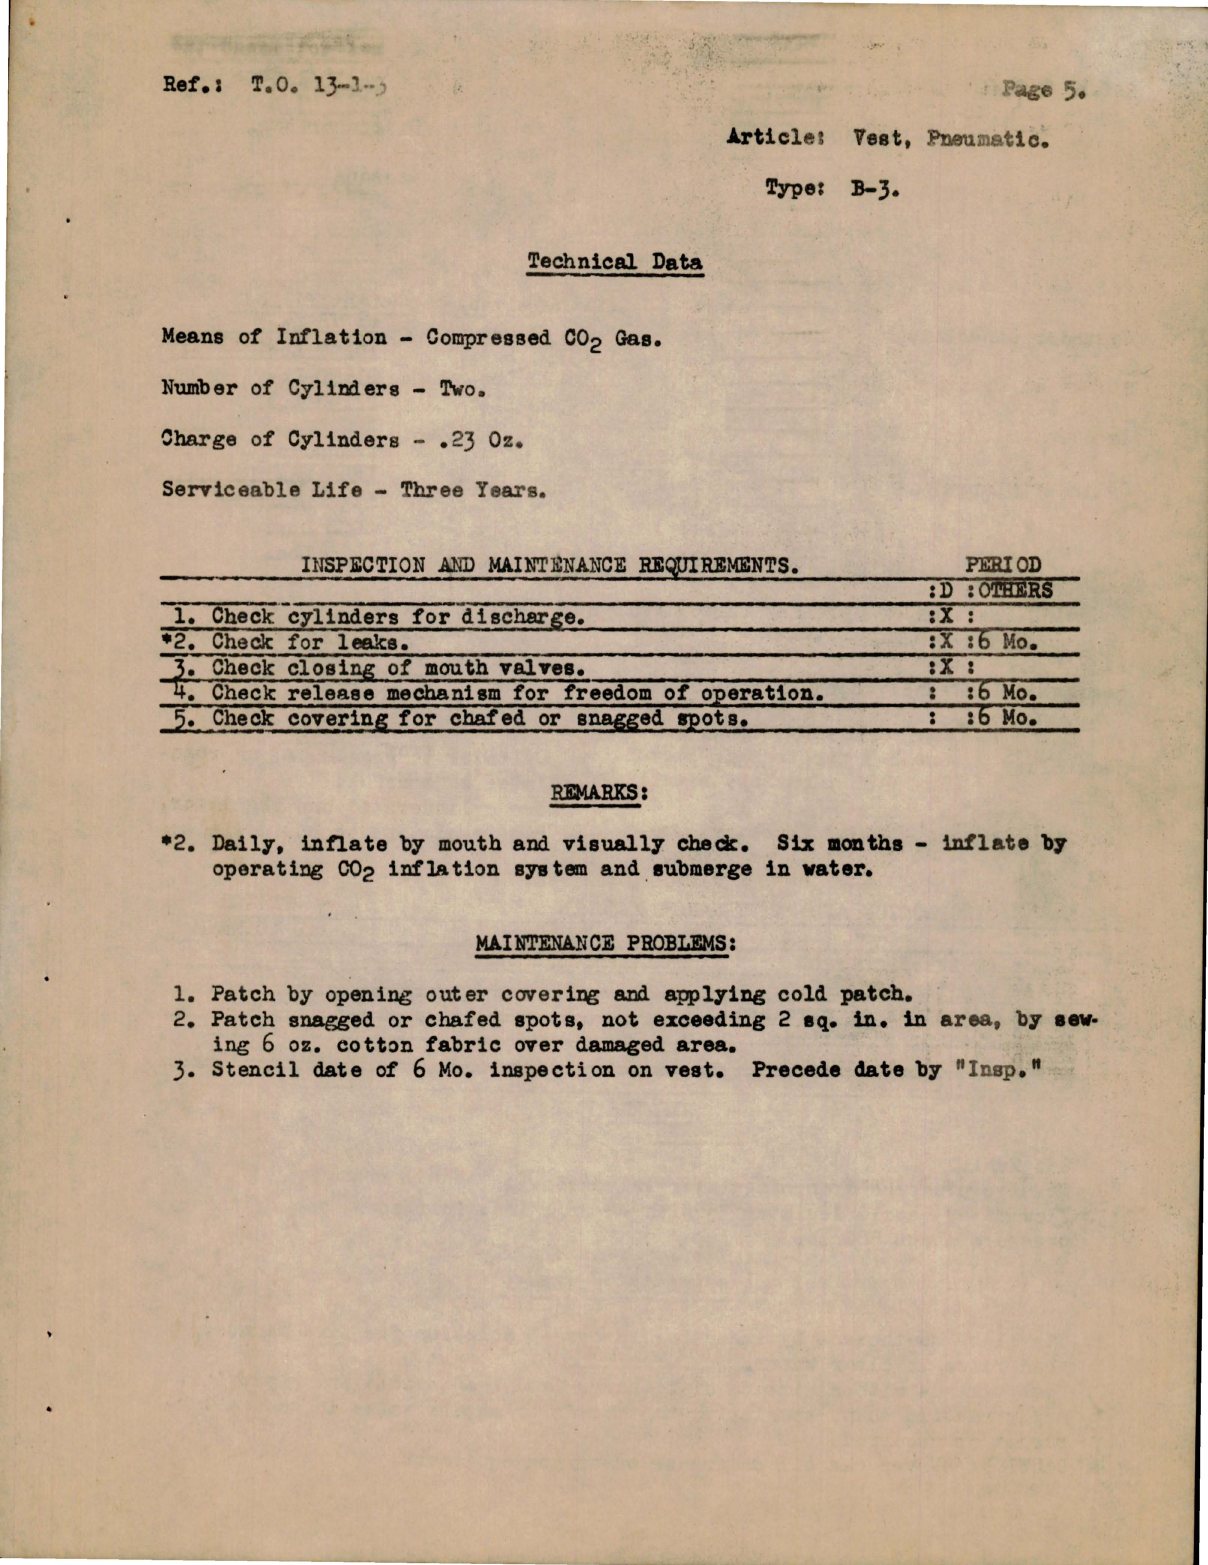 Sample page 7 from AirCorps Library document: Air Corps Technical Schools - Maintenance and Inspection Guide - Hydraulic Systems & Miscellaneous Equipment